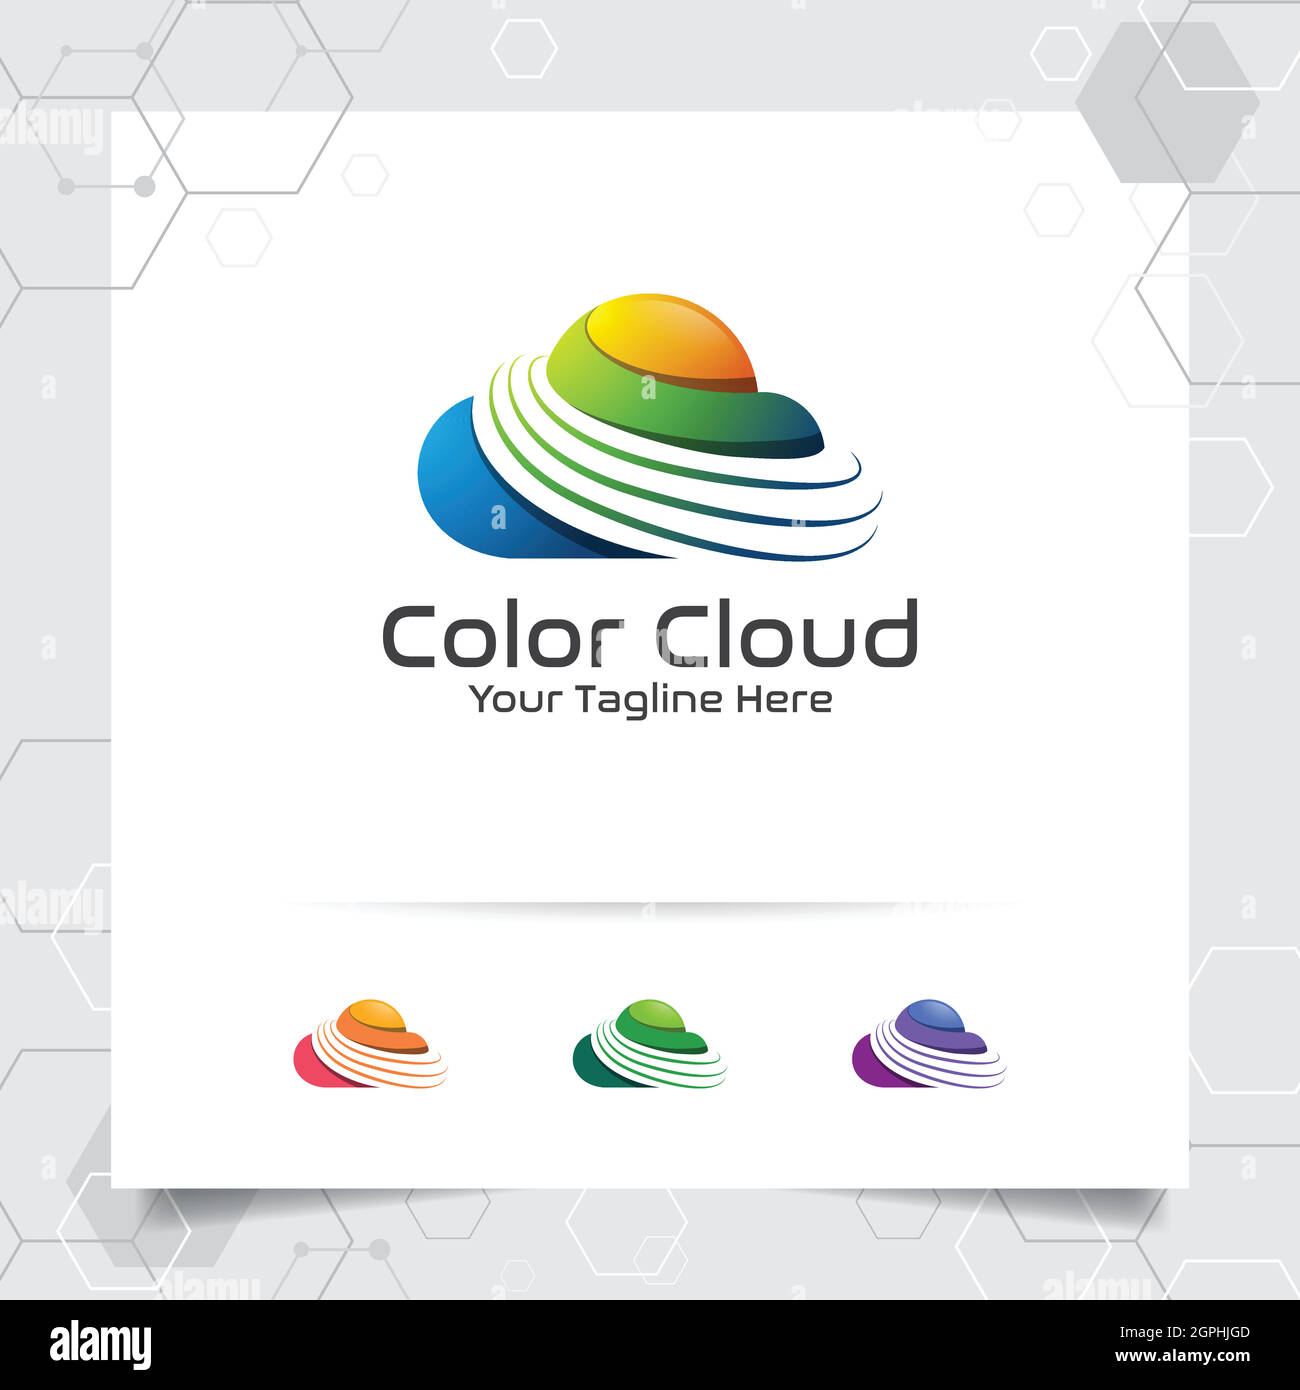 Colorful cloud logo vector design with concept of modern color illustration for business, app, cloud hosting and cloud computing. Stock Vector